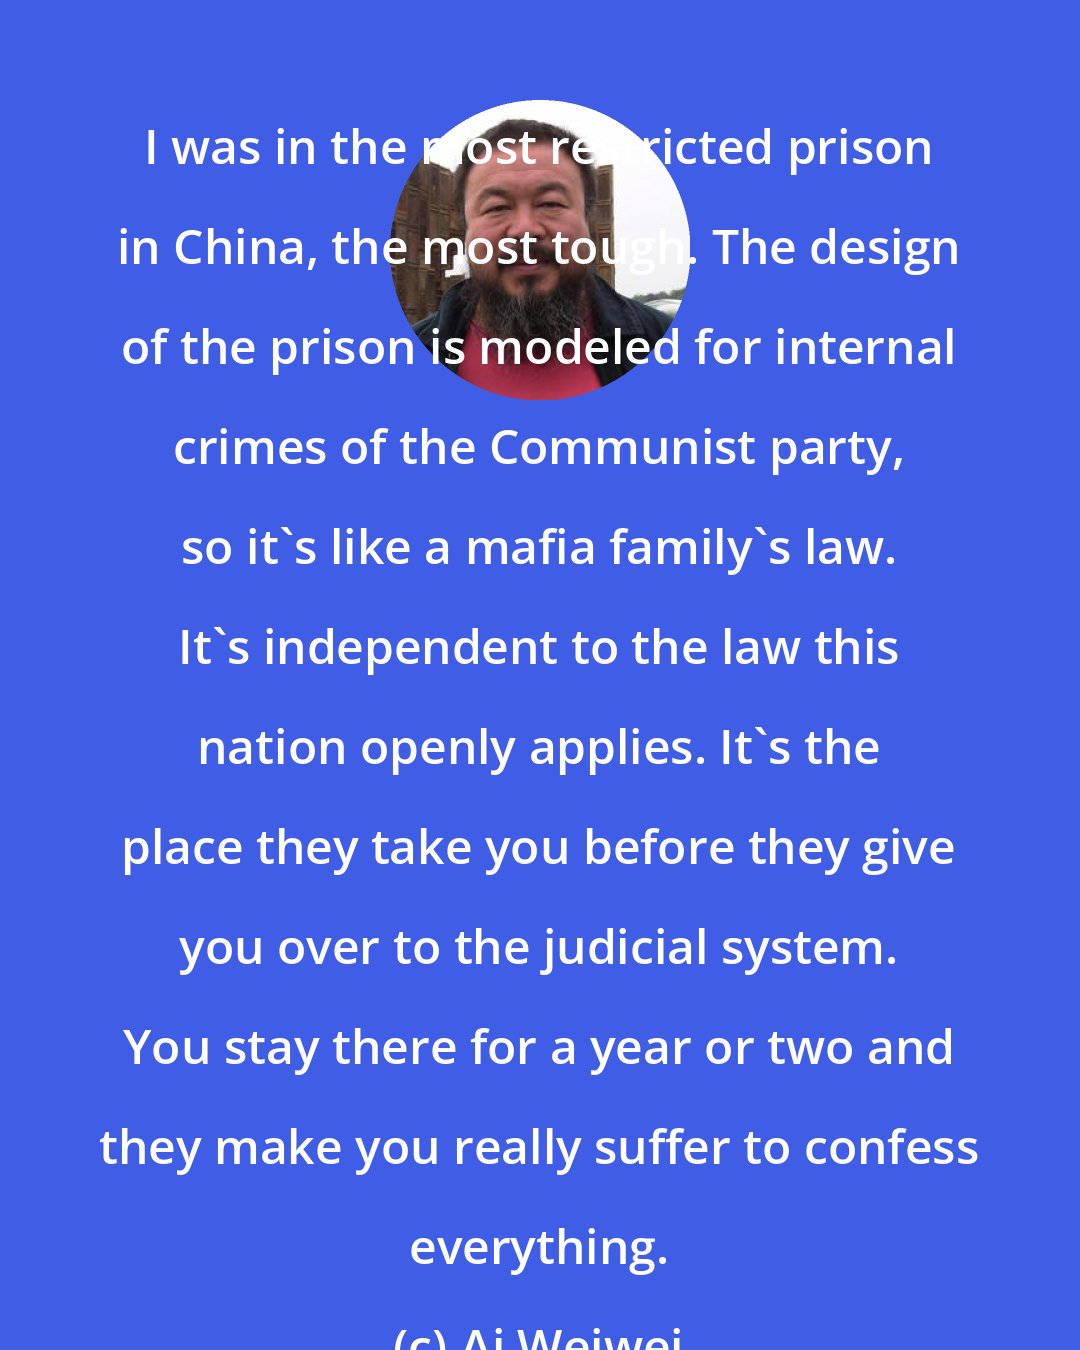 Ai Weiwei: I was in the most restricted prison in China, the most tough. The design of the prison is modeled for internal crimes of the Communist party, so it's like a mafia family's law. It's independent to the law this nation openly applies. It's the place they take you before they give you over to the judicial system. You stay there for a year or two and they make you really suffer to confess everything.